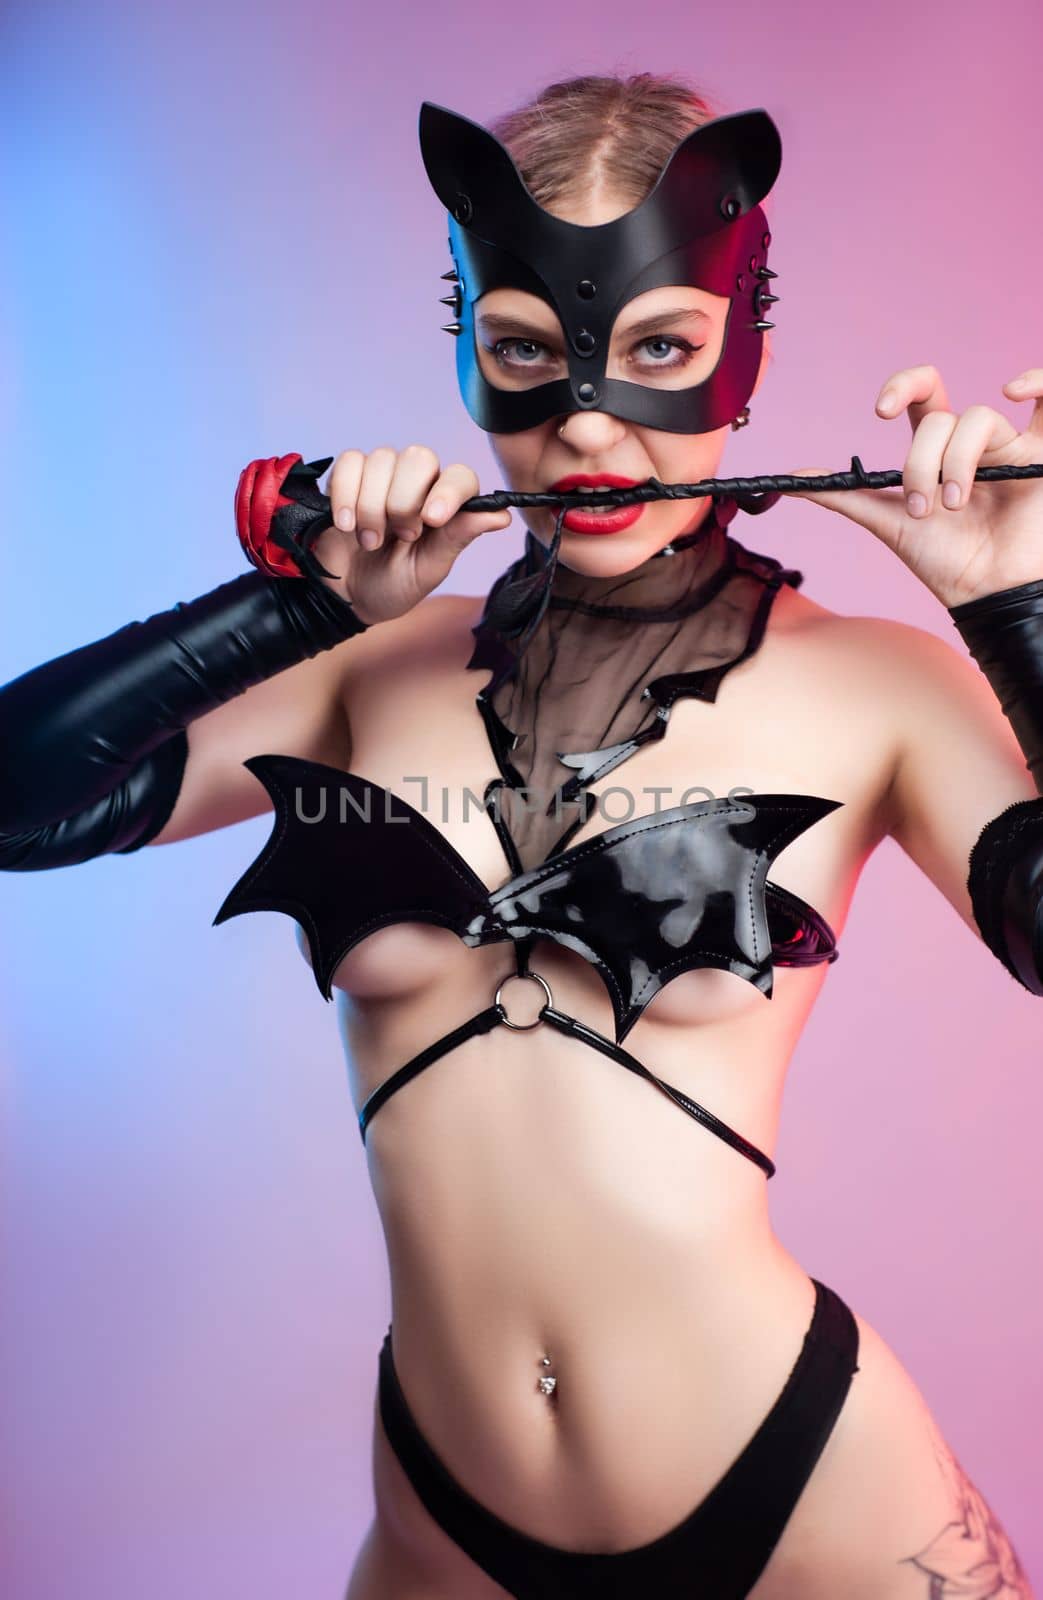 Sexy girl in bdsm underwear leather mask and leather rose for bdsm games costume for sex games on pink bright background copy paste by Rotozey